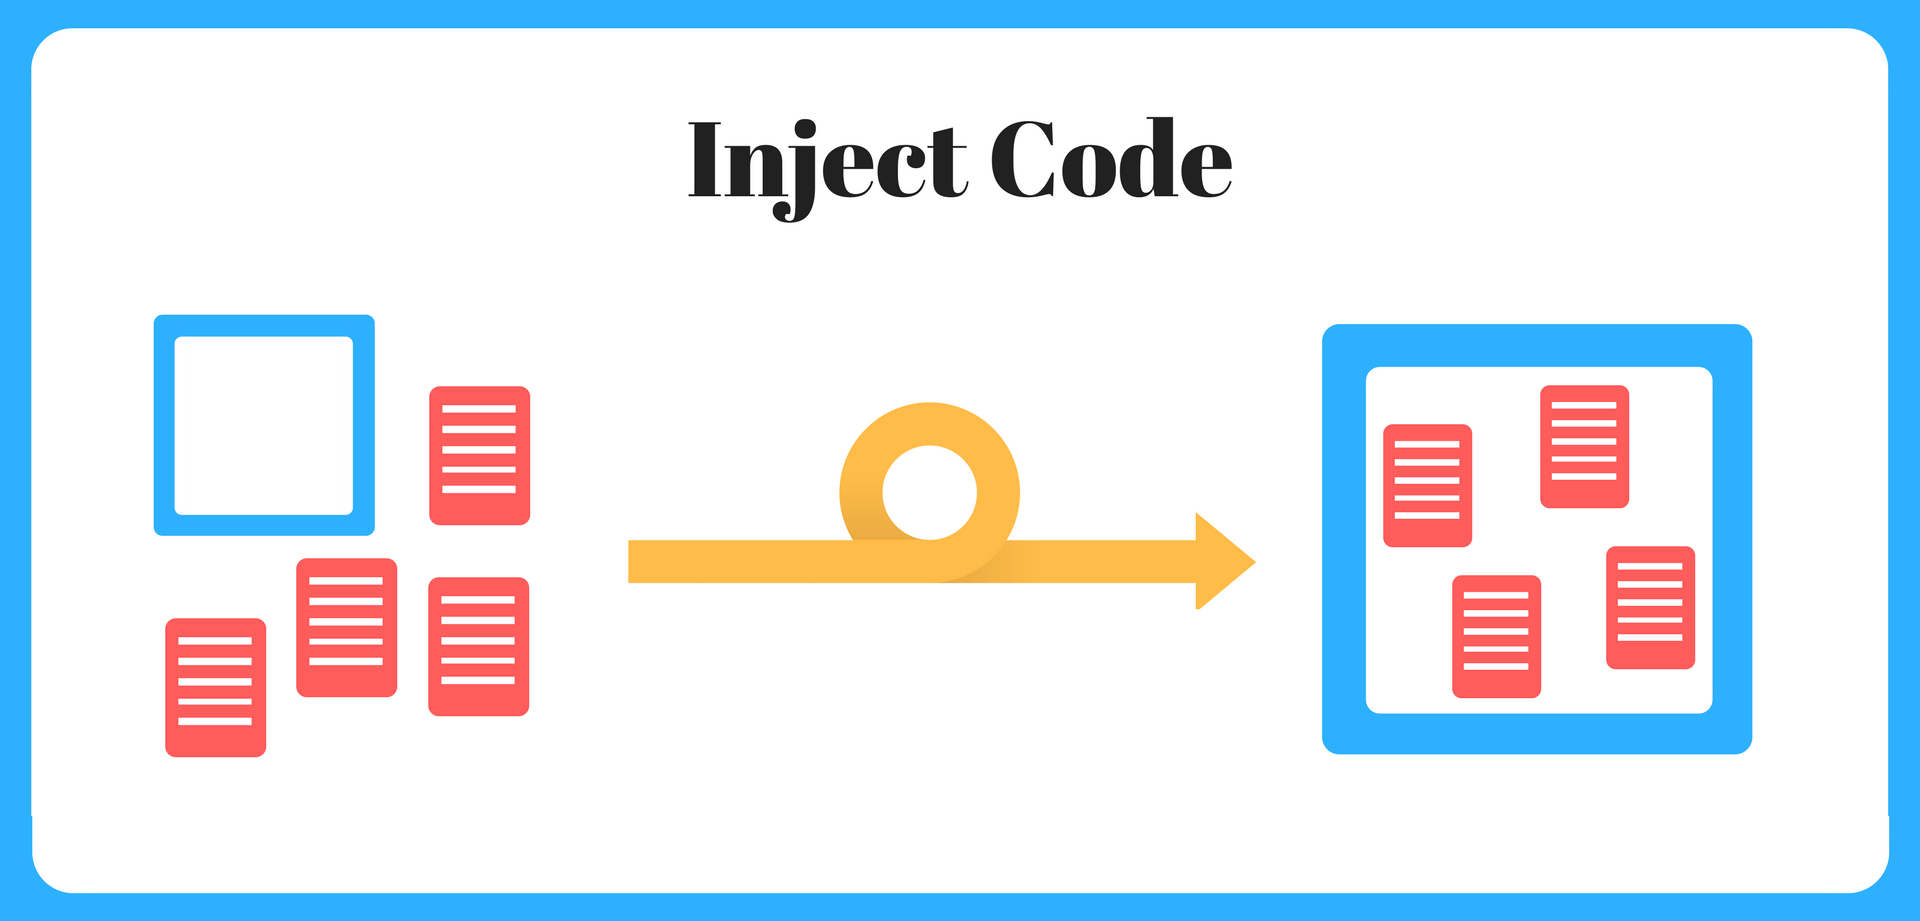 Inject Code